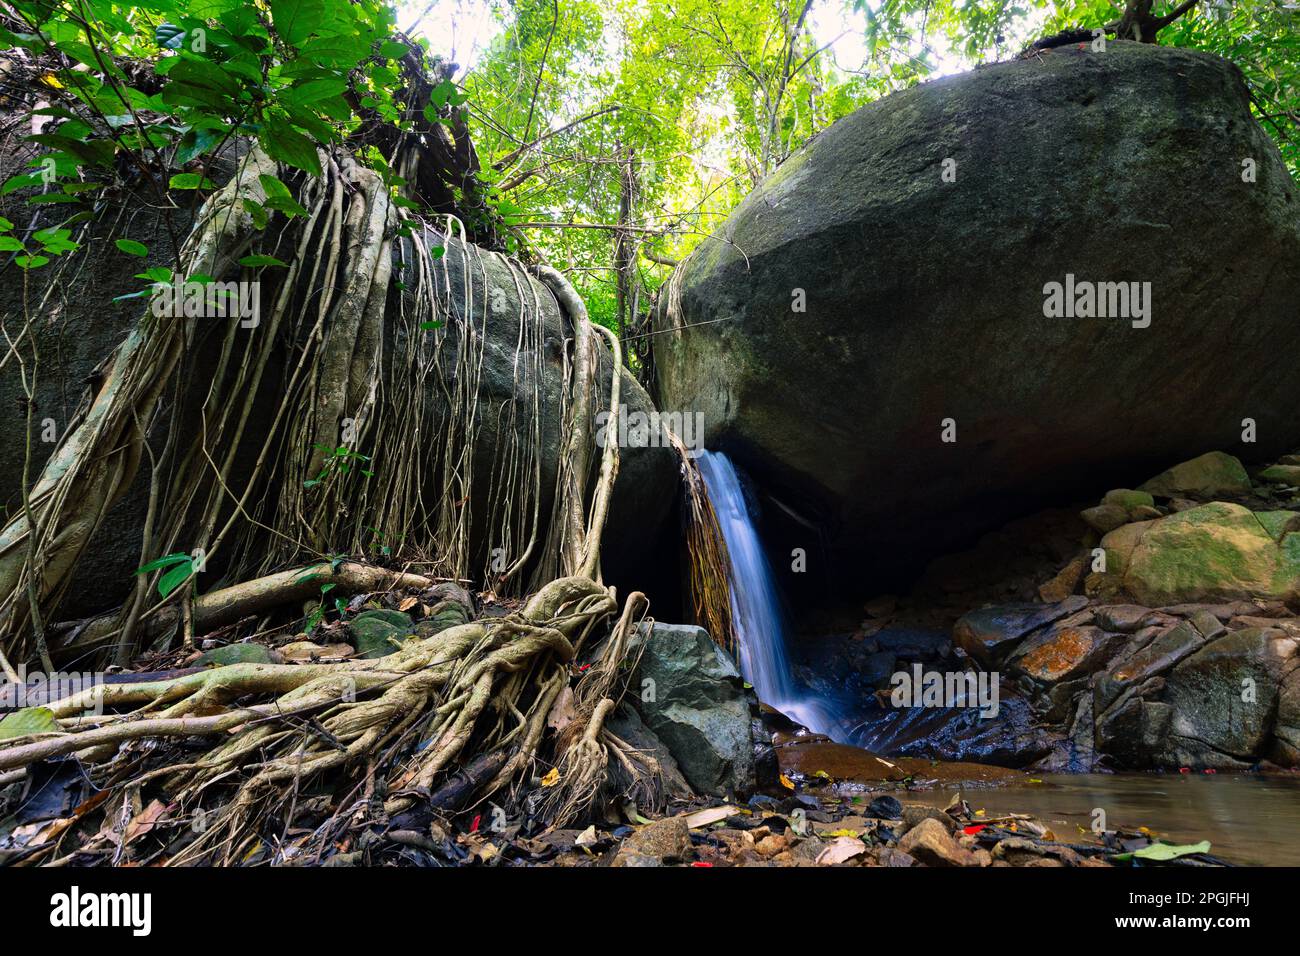 Rocky jungle area with ficus tree roots and waterfall in Chiang Dao forest, Thailand Stock Photo